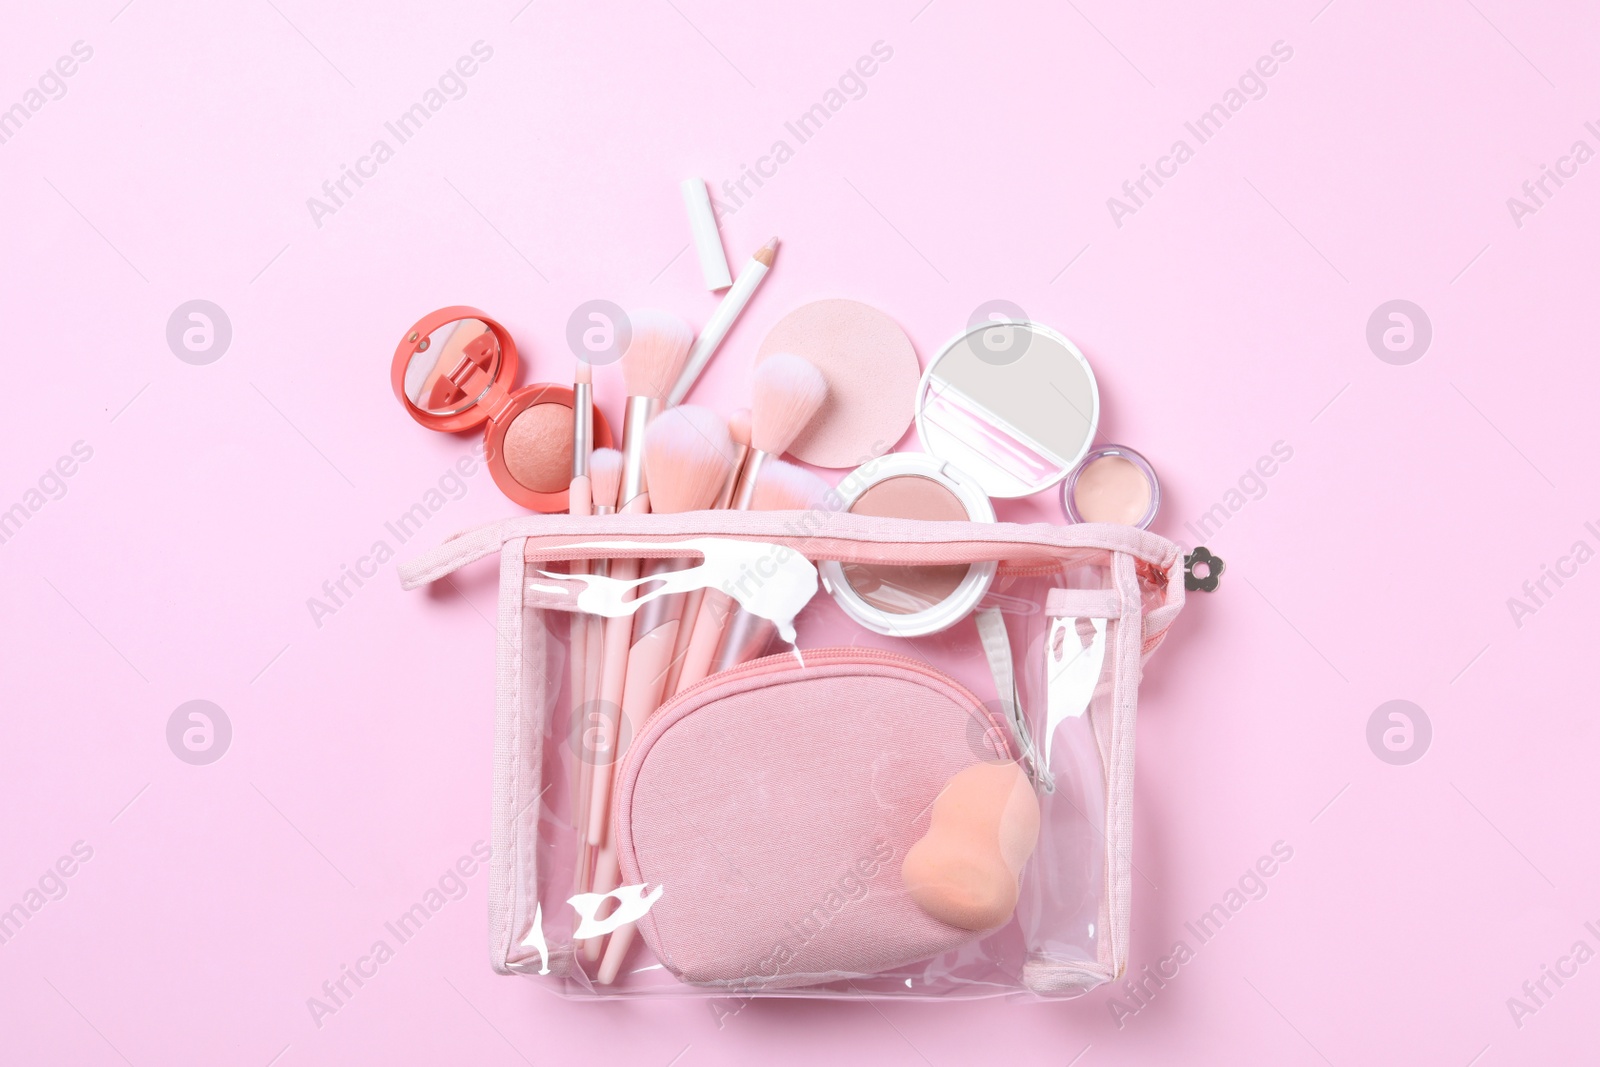 Photo of Plastic cosmetic bag with makeup products and beauty accessories on pink background, flat lay